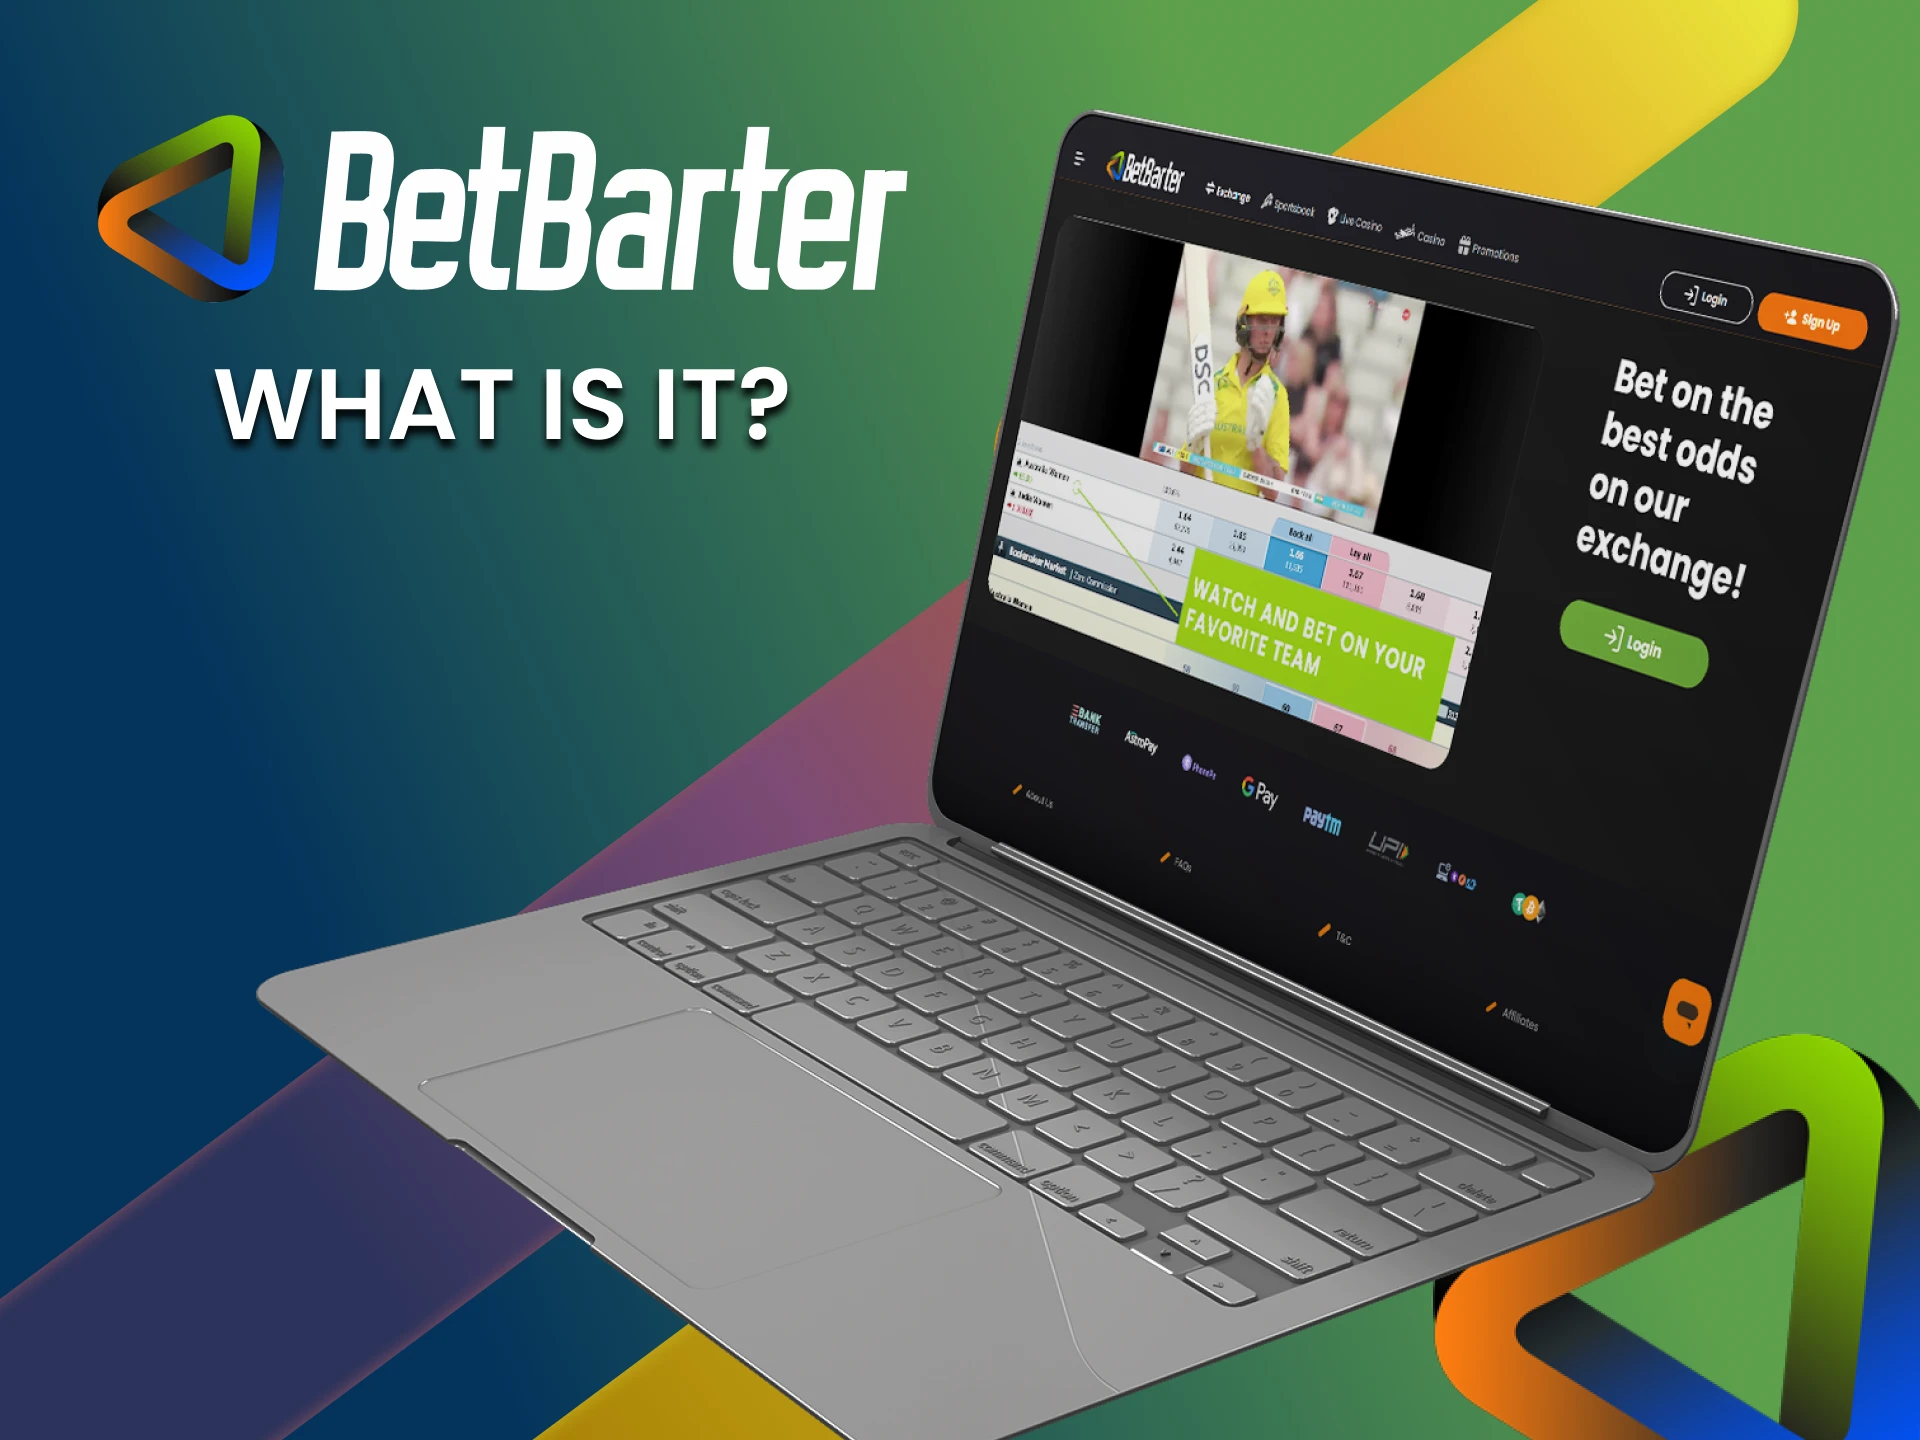 We will tell you what Exchange is on the BetBarter website.